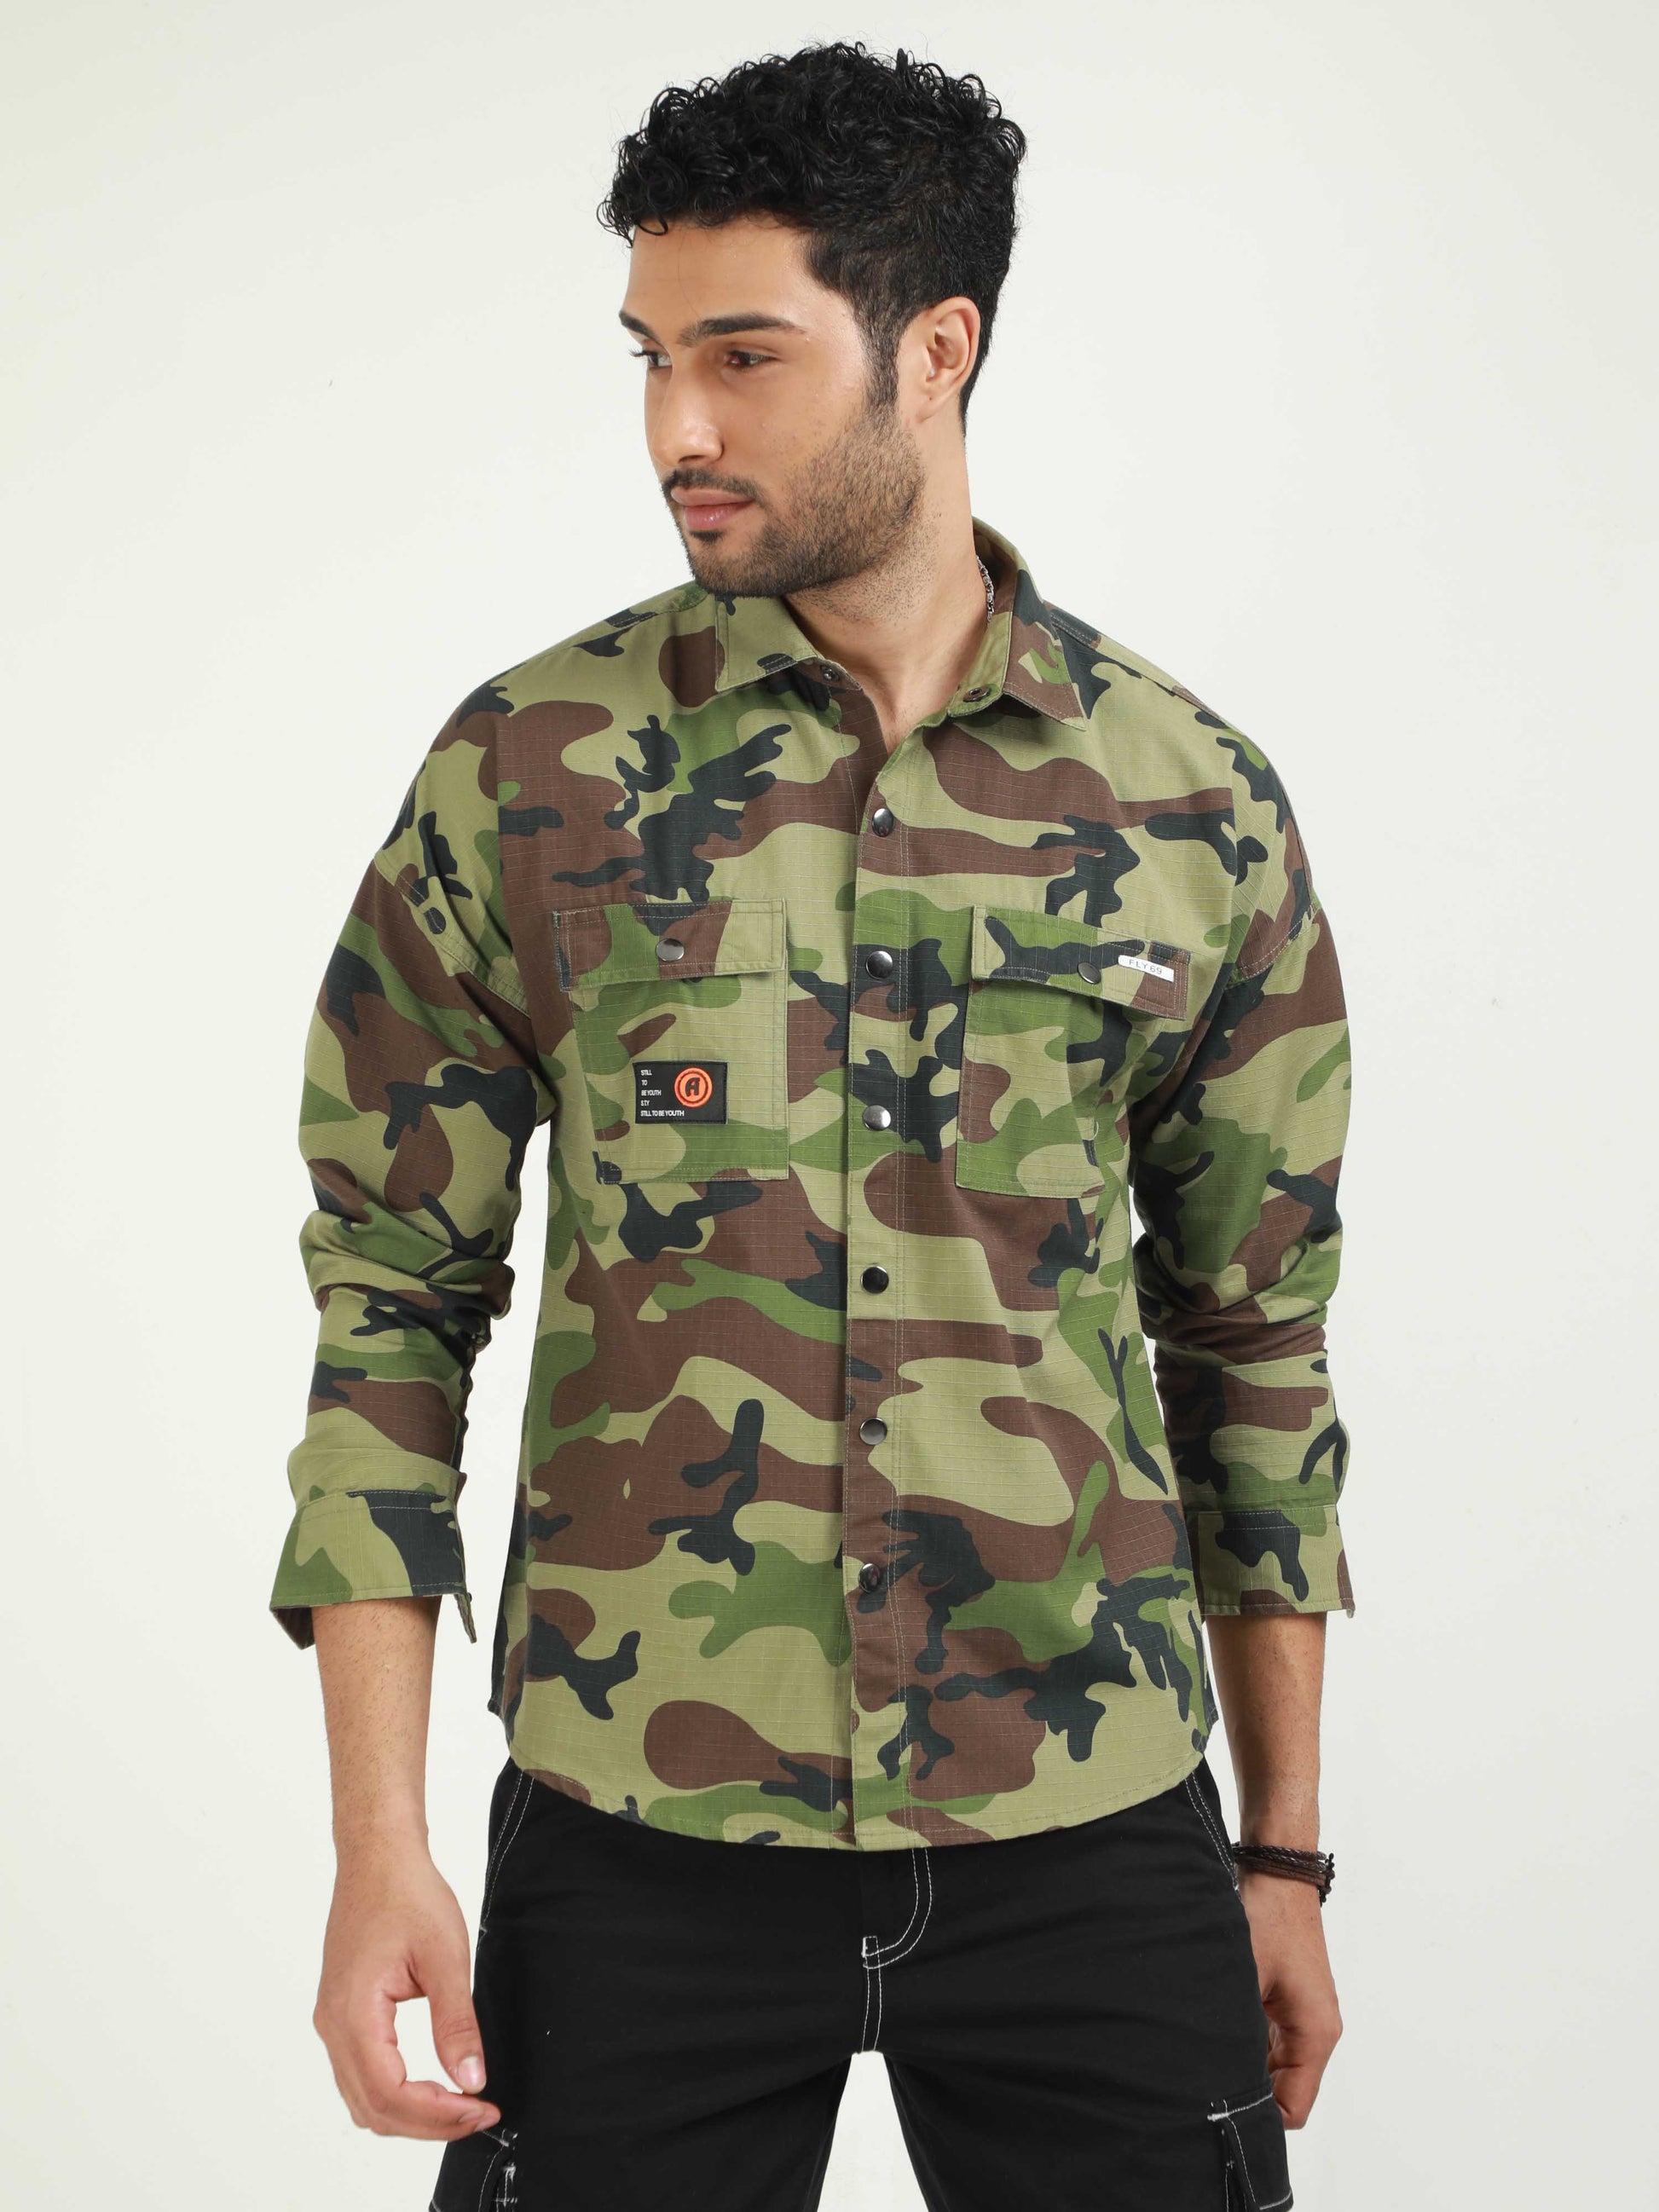 Camouflage Shirts - Buy Camouflage Shirts online in India